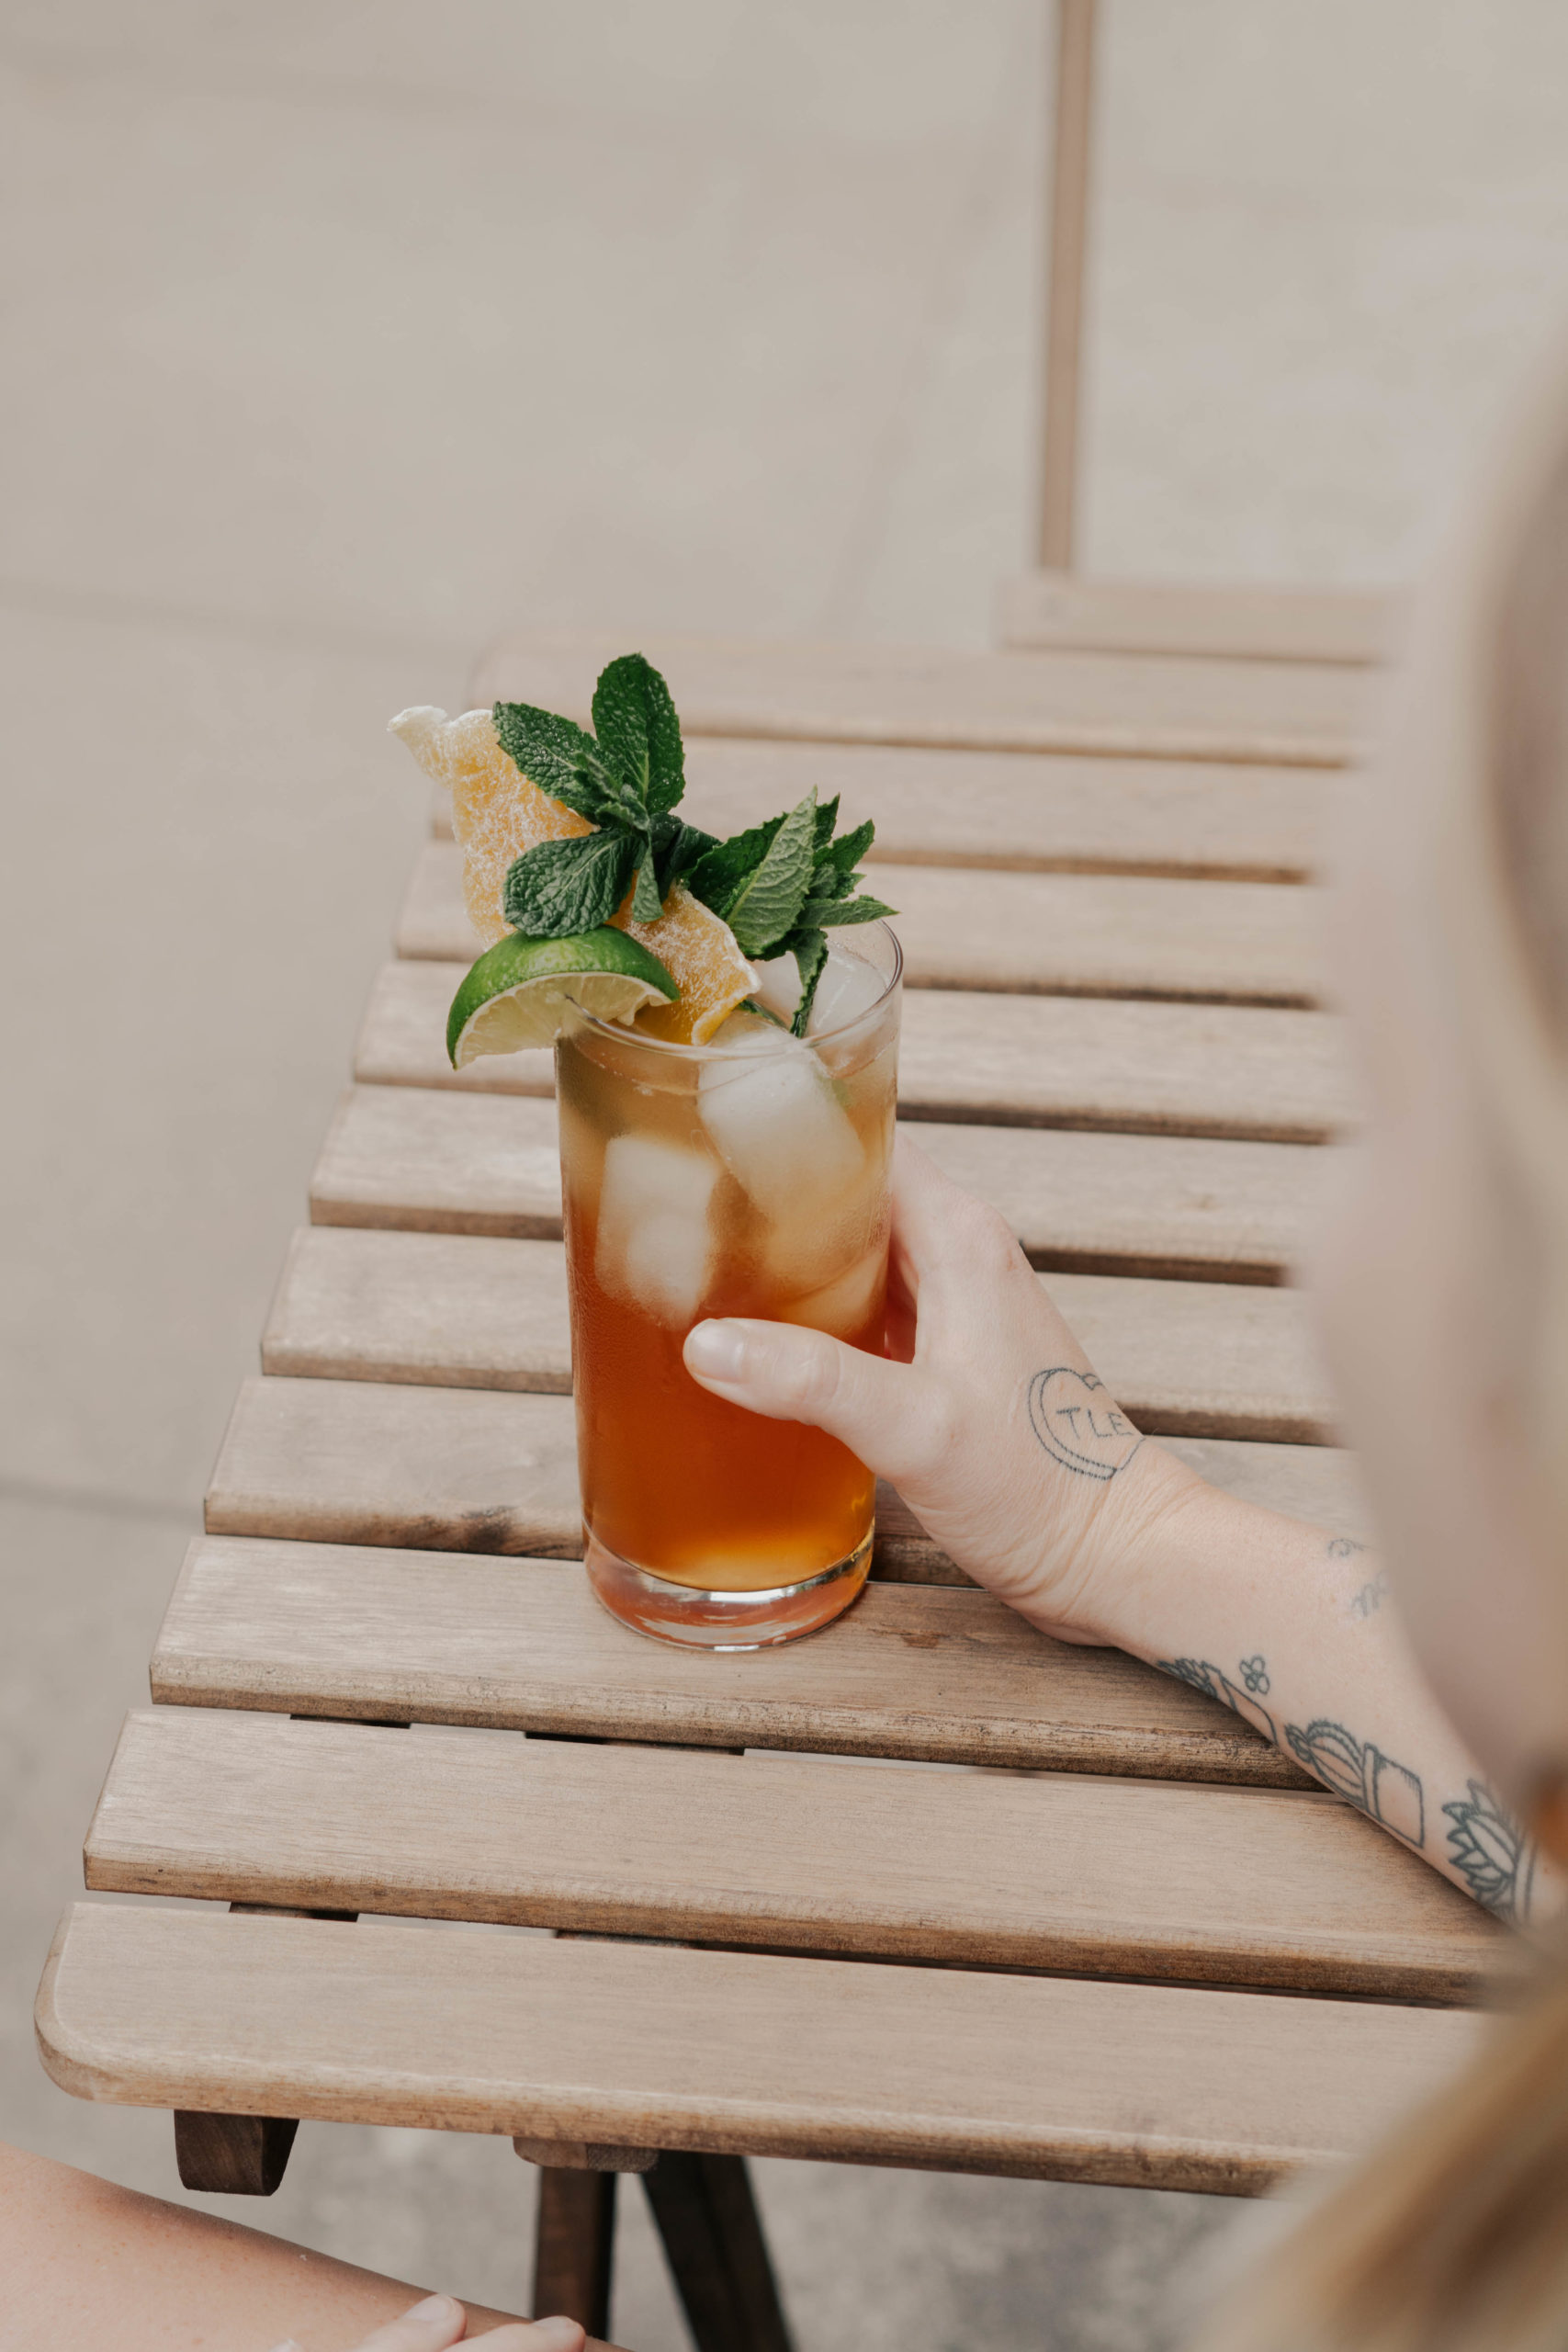 Peach and Mint Iced Tea with Vodka and Tequila
